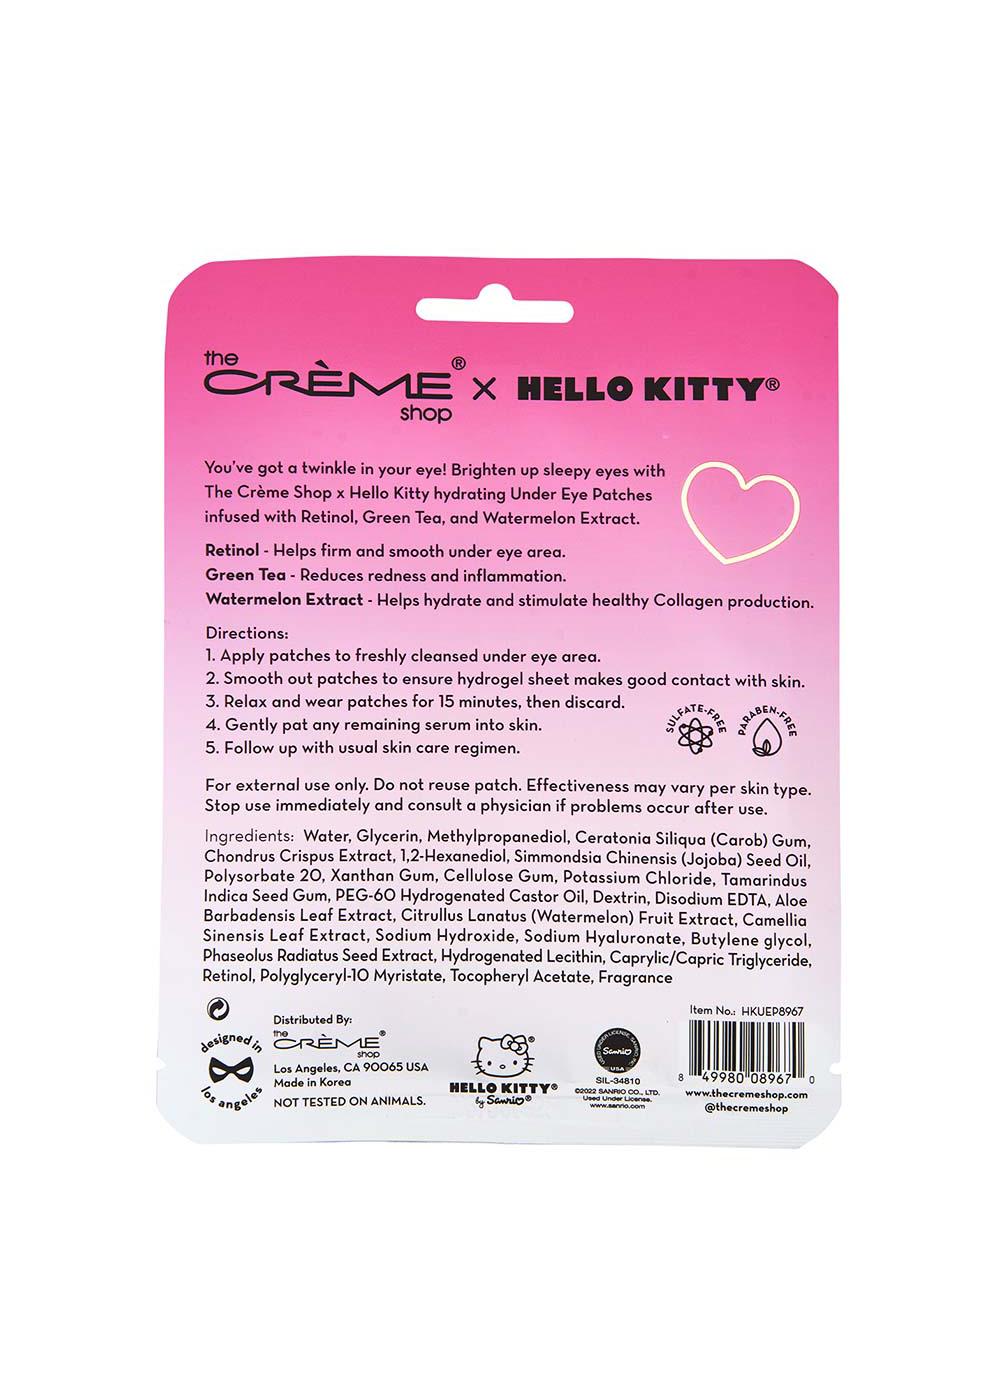 The Crème Shop X Hello Kitty Twinkle Eyes - Eye Patches; image 2 of 2